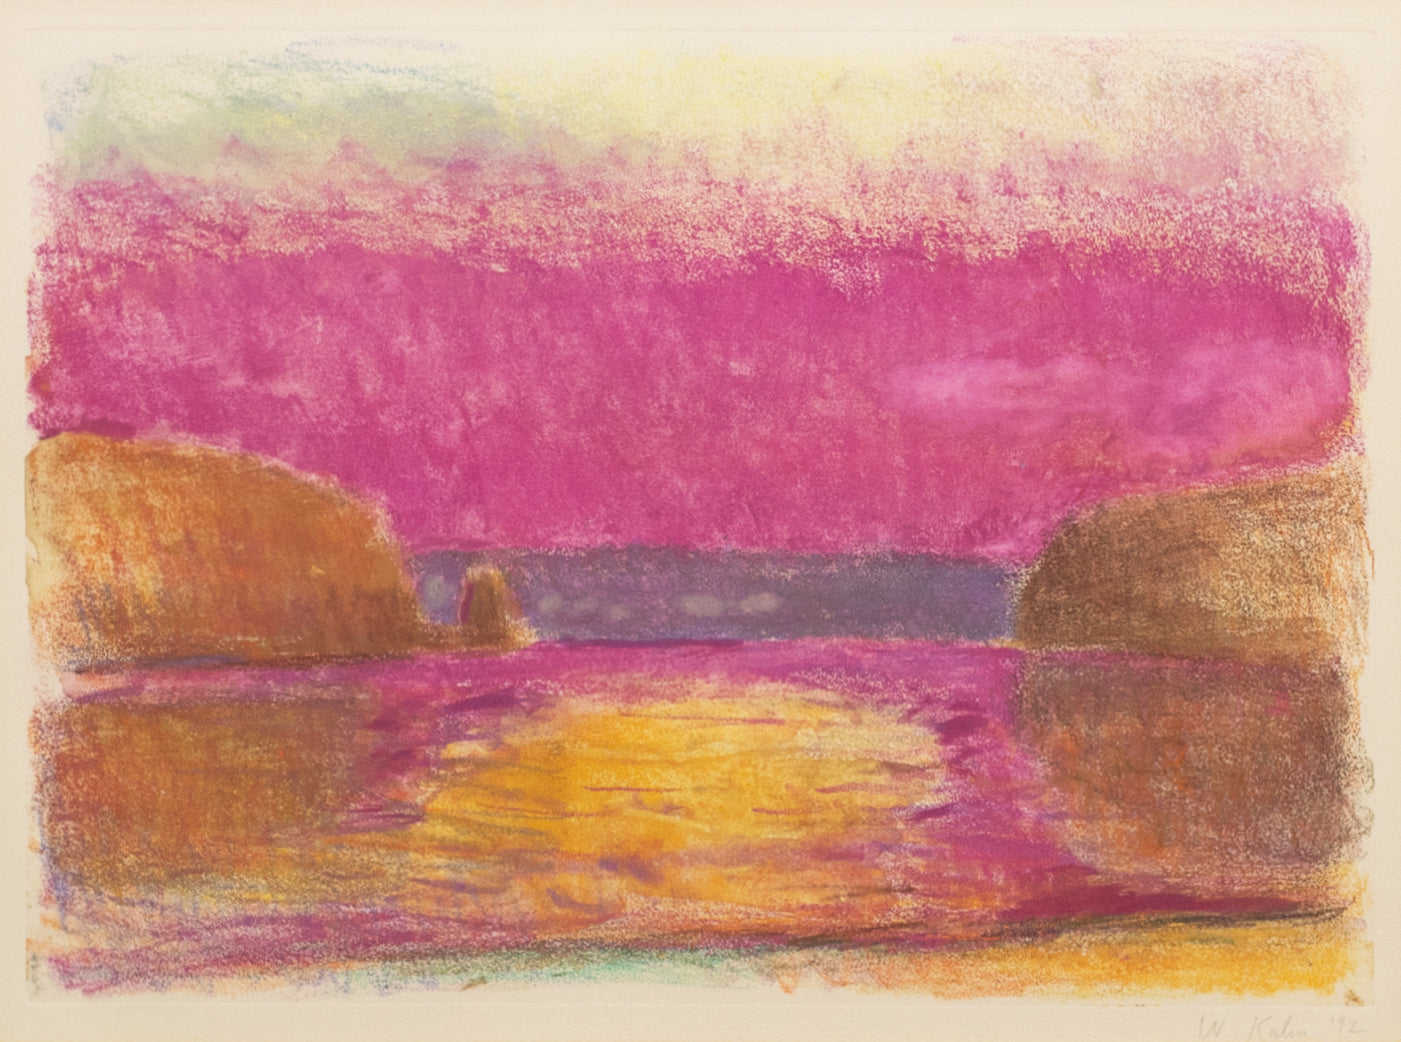 Wolf Kahn  Connecticut River Sunset, 1992  Monotype ink on paper  15.5 x 22 inches Framed: 27.50 x 32.50 x 1.50 inches;Connecticut River Sunset is one of Kahn's abstract works where his fame as a colorist is evident in the use of pinks, browns, yellows, and purples.Available at Manolis Projects Gallery